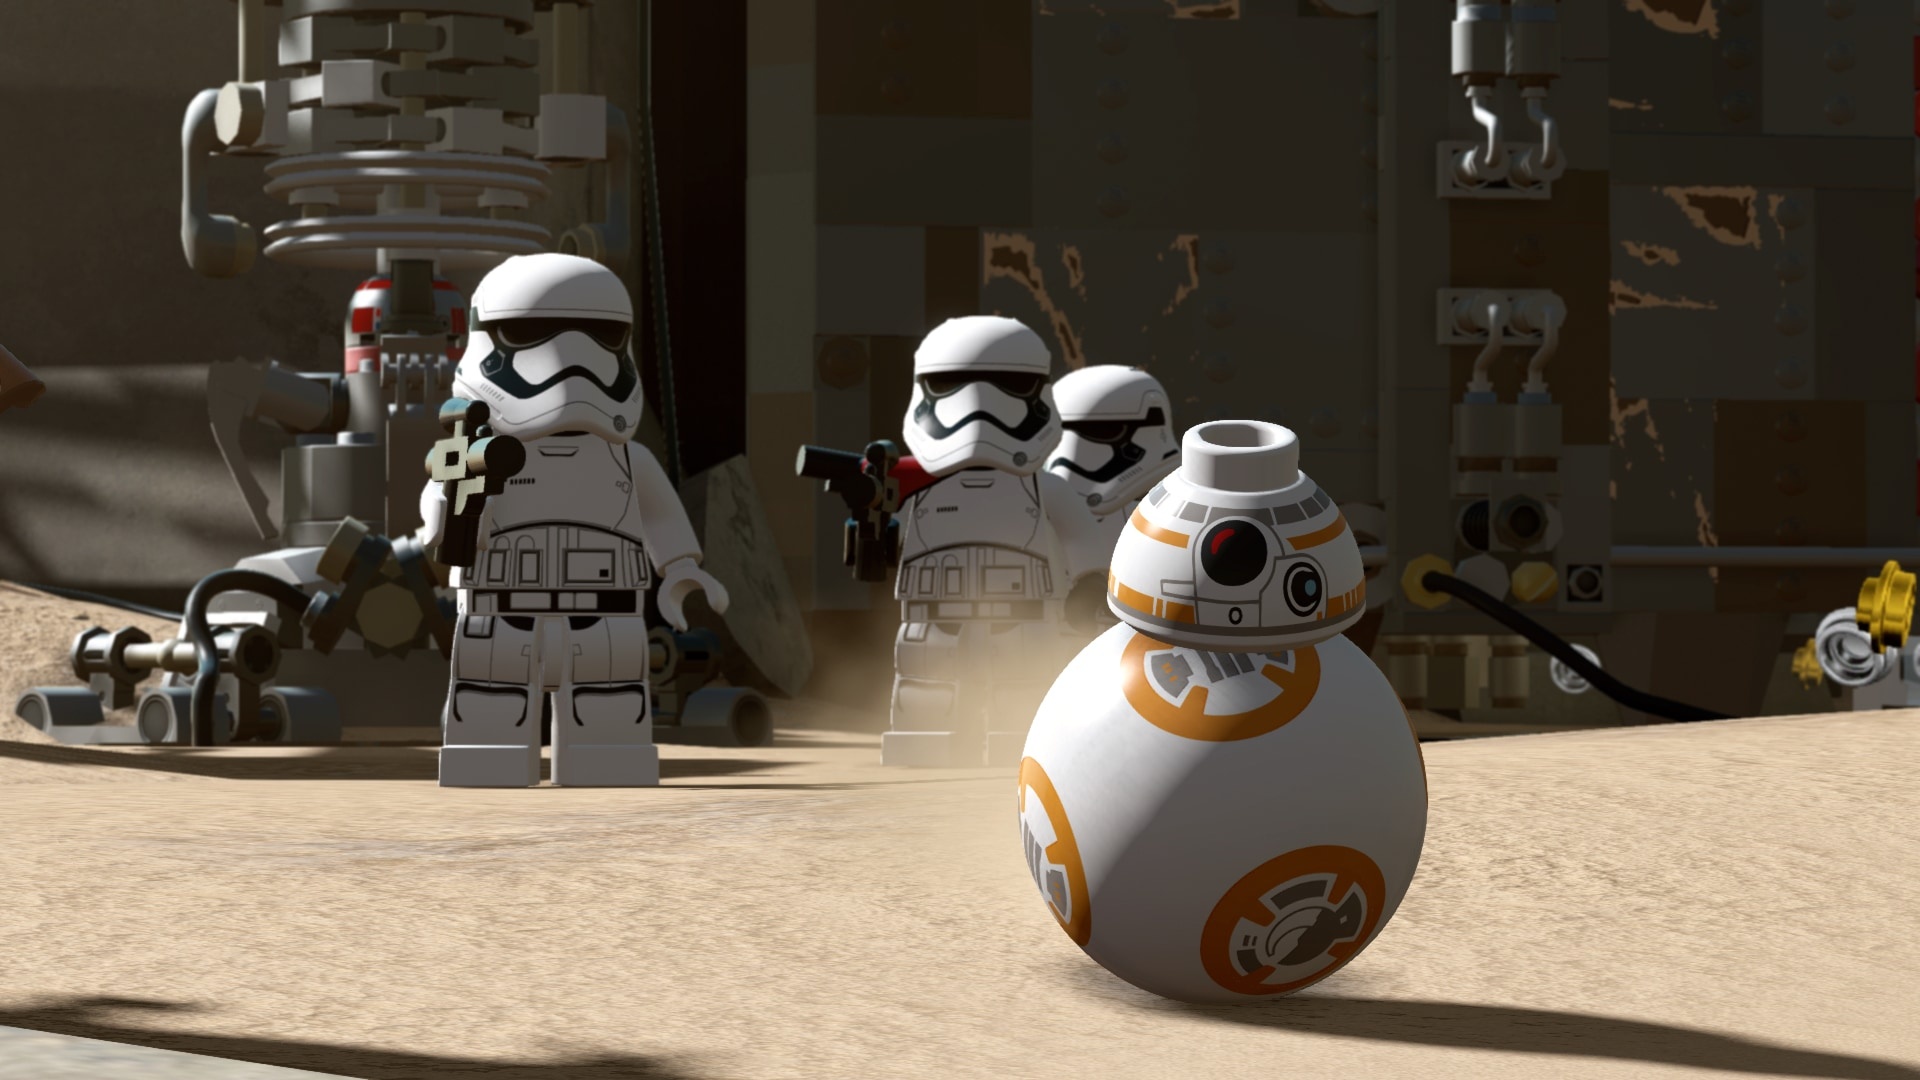 Ambitious gaming project, Open-world adventure, LEGO Star Wars innovation, New possibilities, 1920x1080 Full HD Desktop